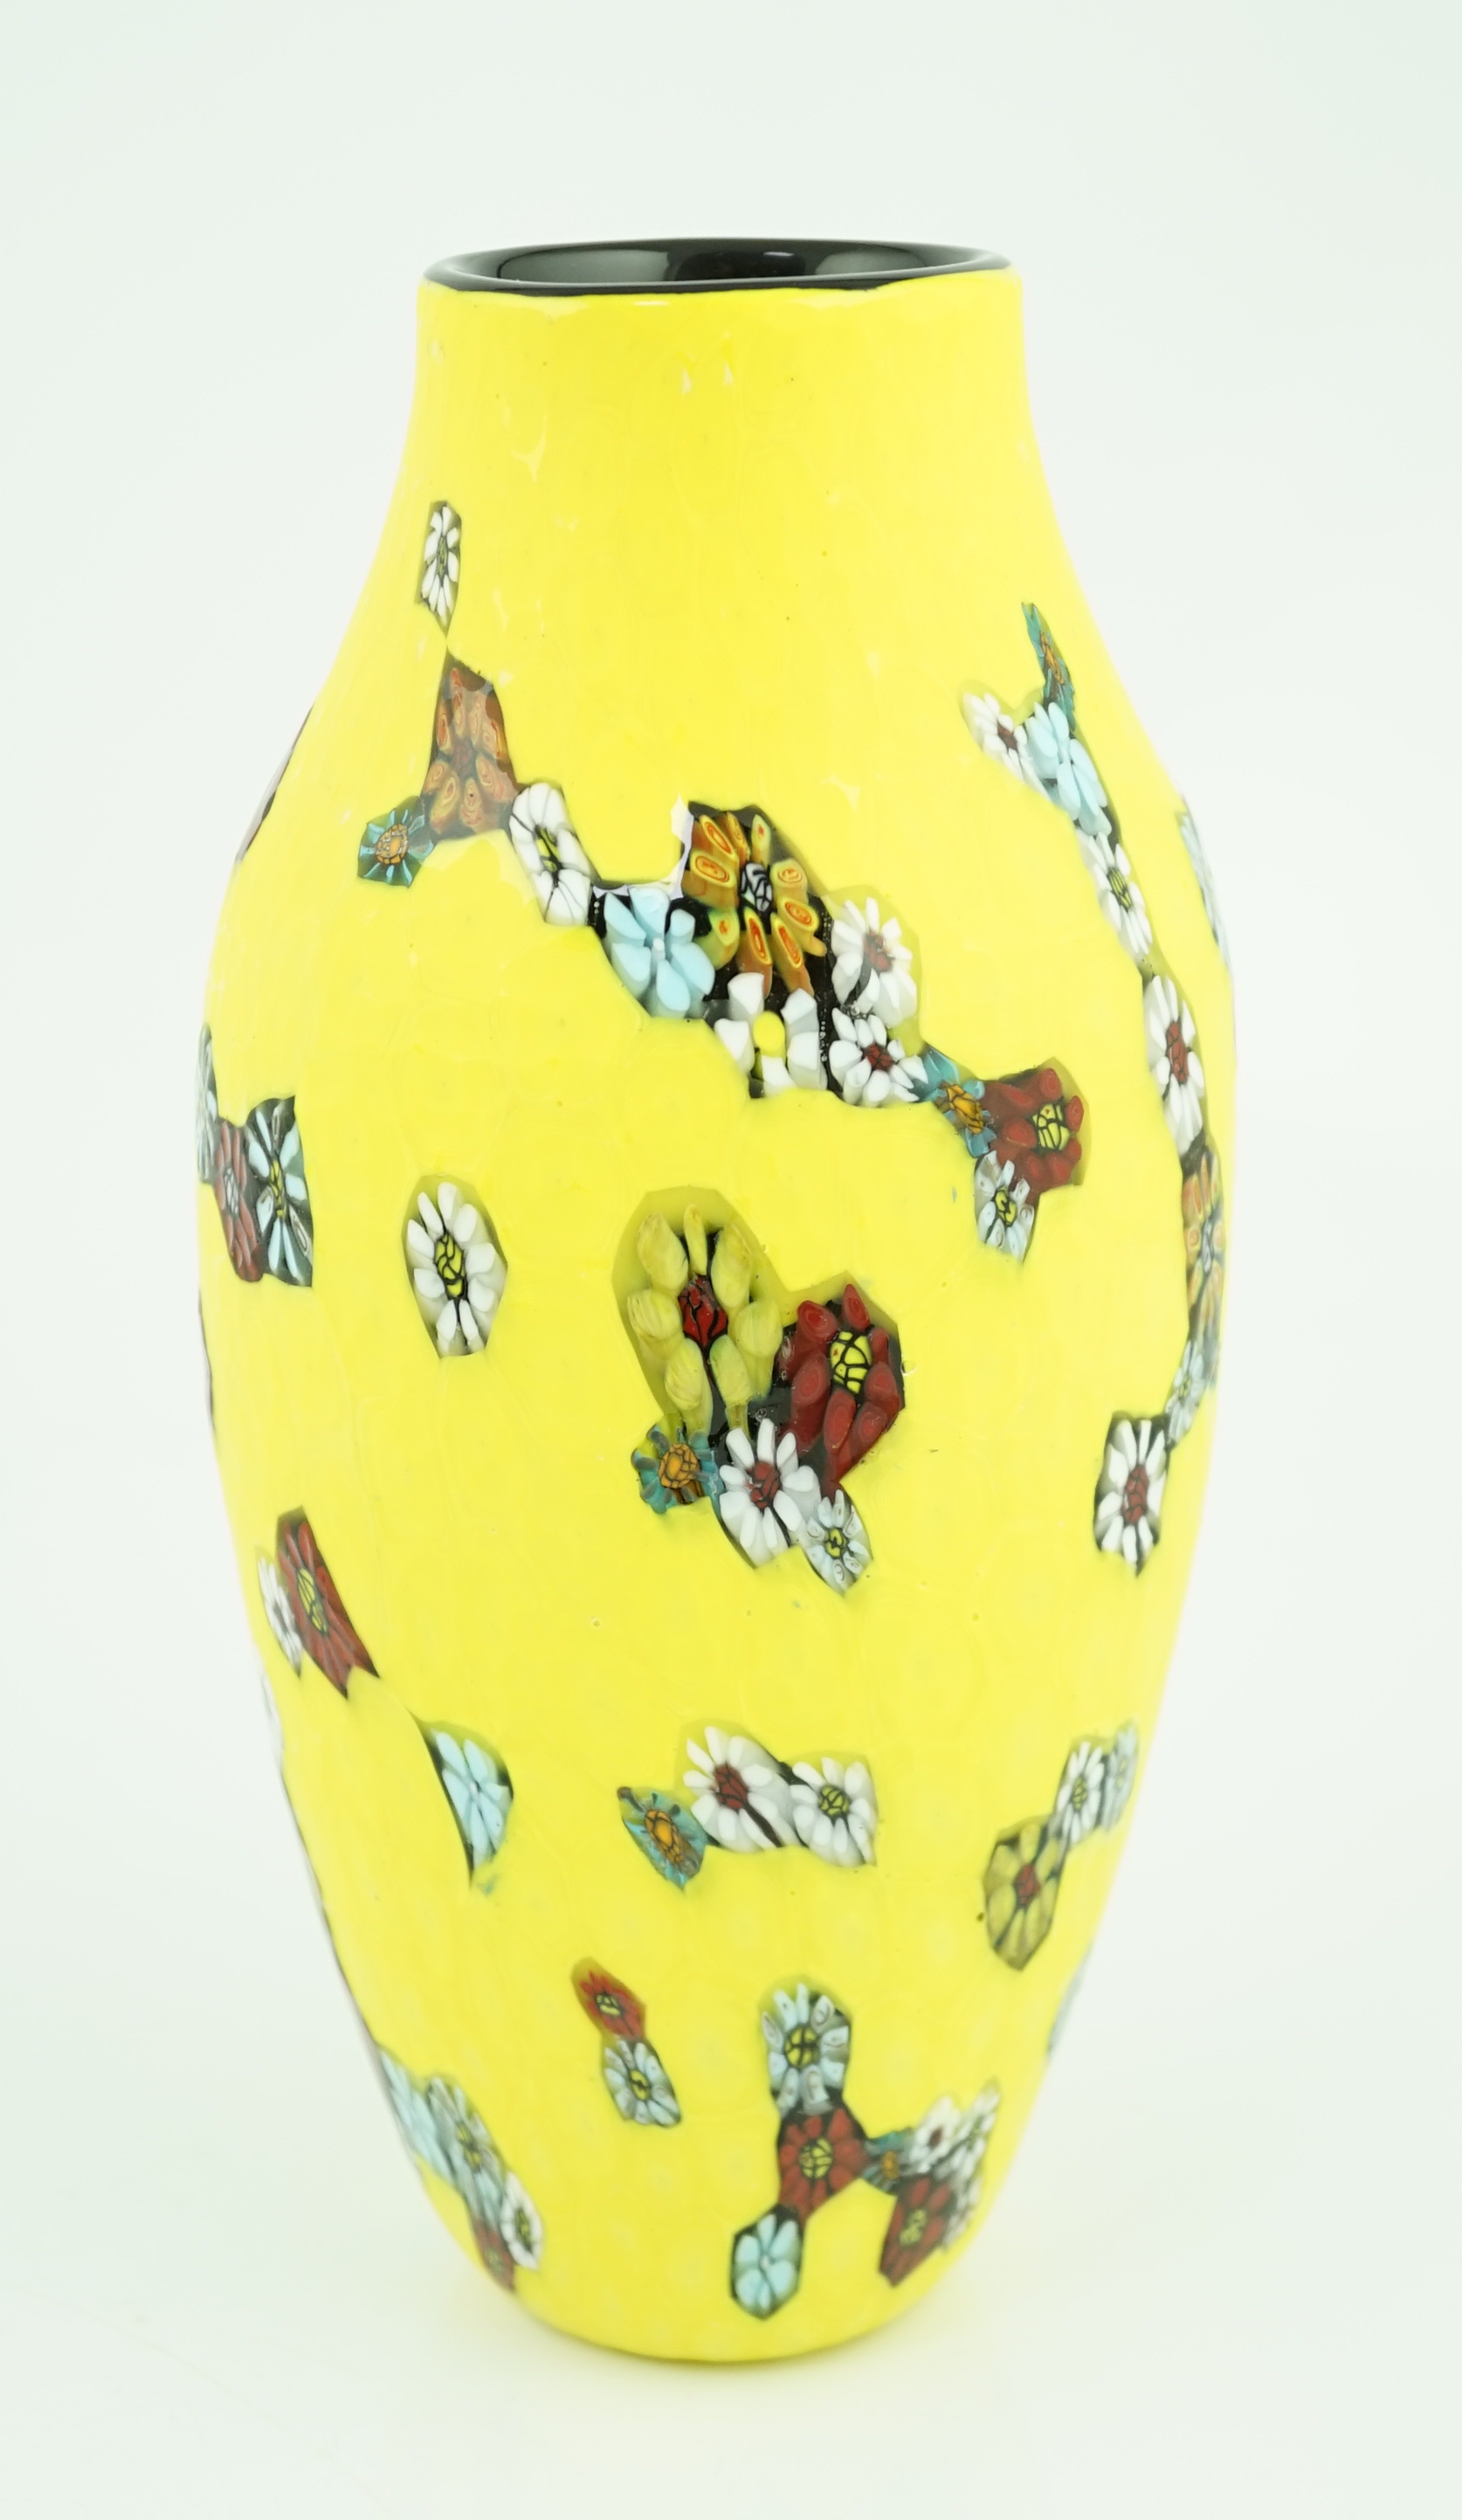 Vittorio Ferro (1932-2012) A Murano glass Murrine vase, the yellow battuto ground, decorated with scattered flower heads, unsigned, 28cm, Please note this lot attracts an additional import tax of 20% on the hammer price